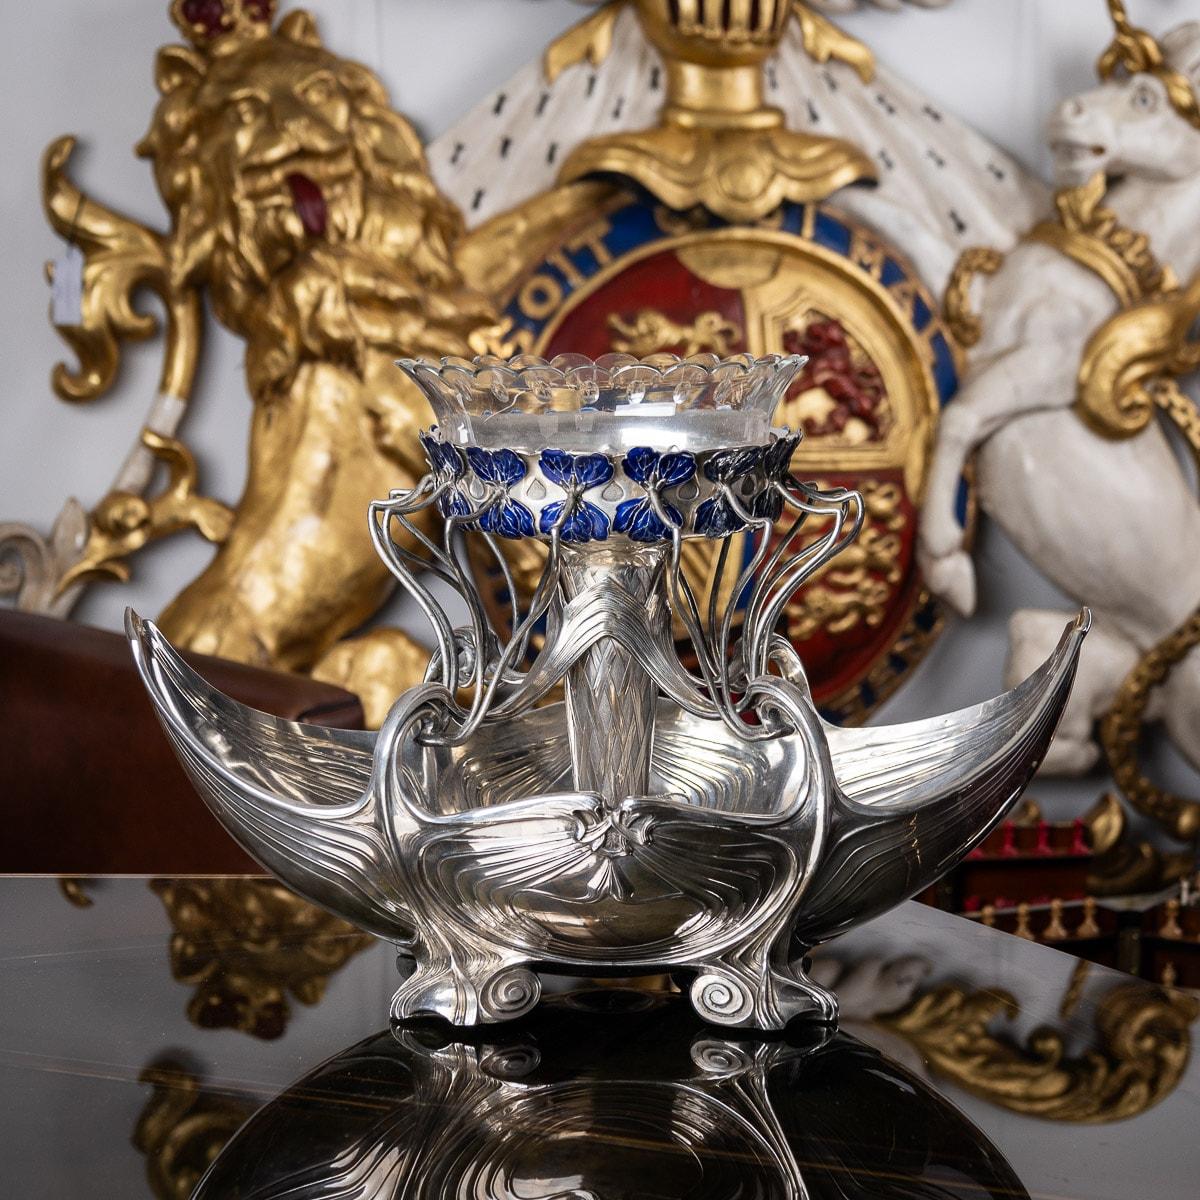 Antique early-20th Century German Art Neuveau Impressively large solid silver and enamel centrepiece. The bowl raised on four spreading scroll feet, decorated throughout with flowing floral motifs and applied with unusual flowing handles suspending